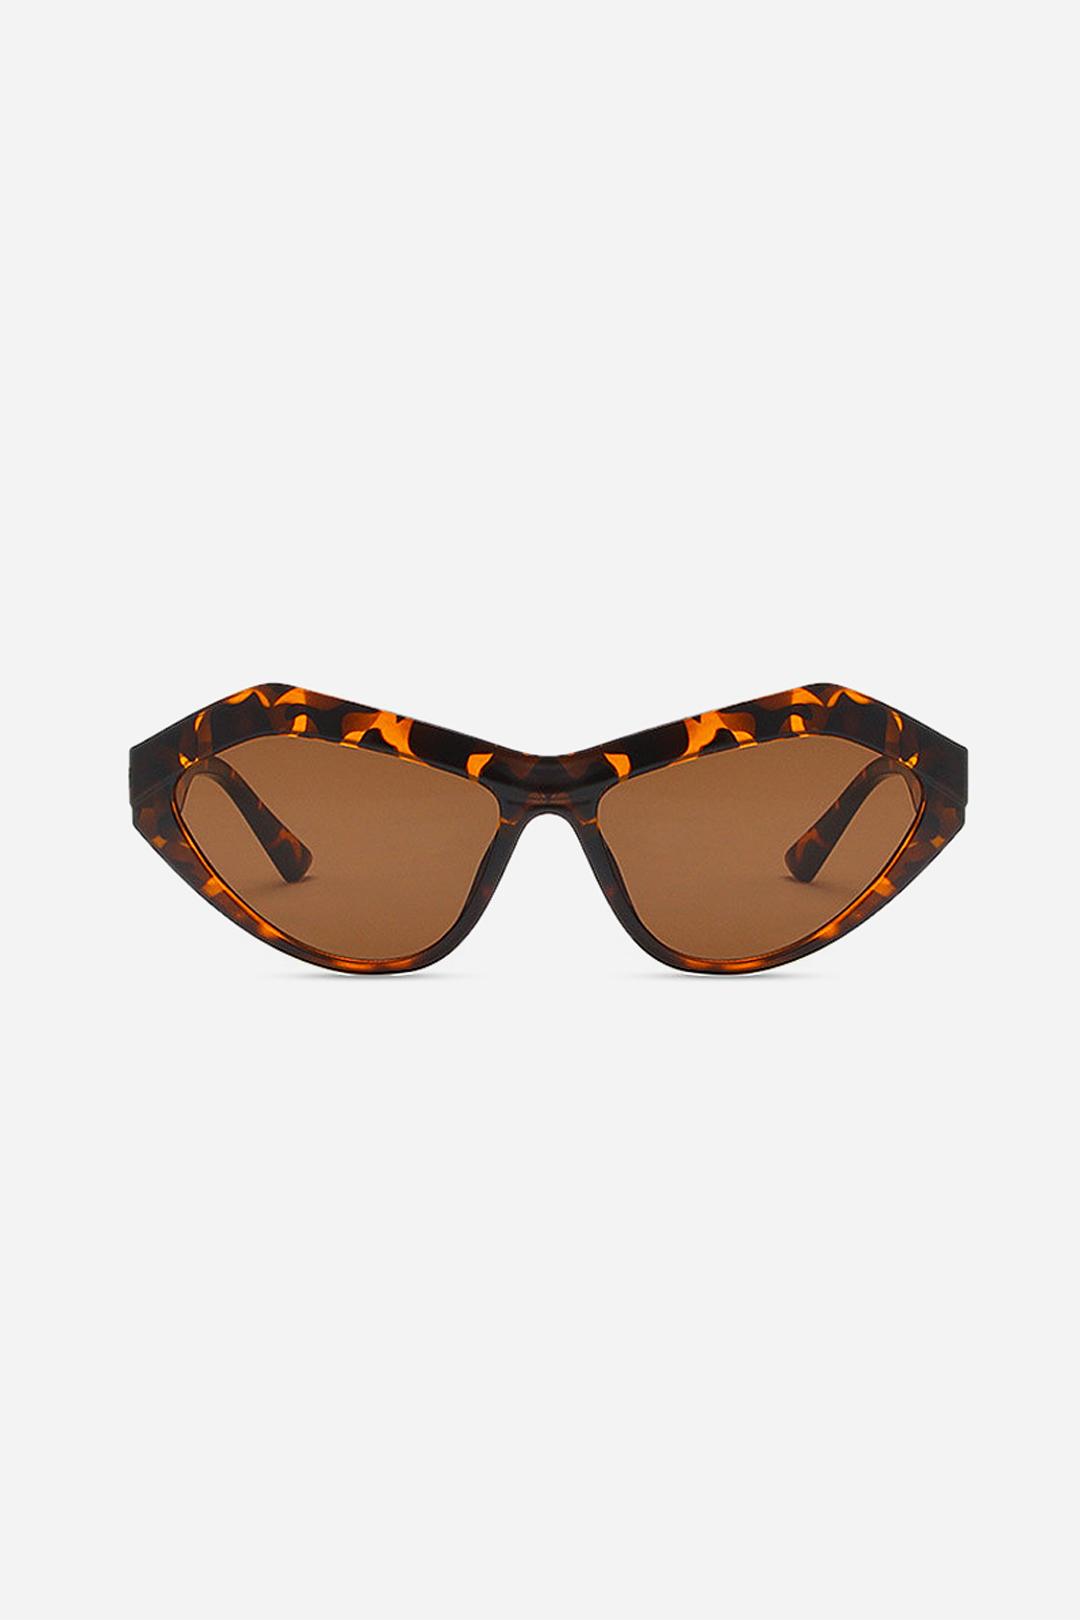 Geometric Frame Sunglasses In Leopard Print With Brown Lens